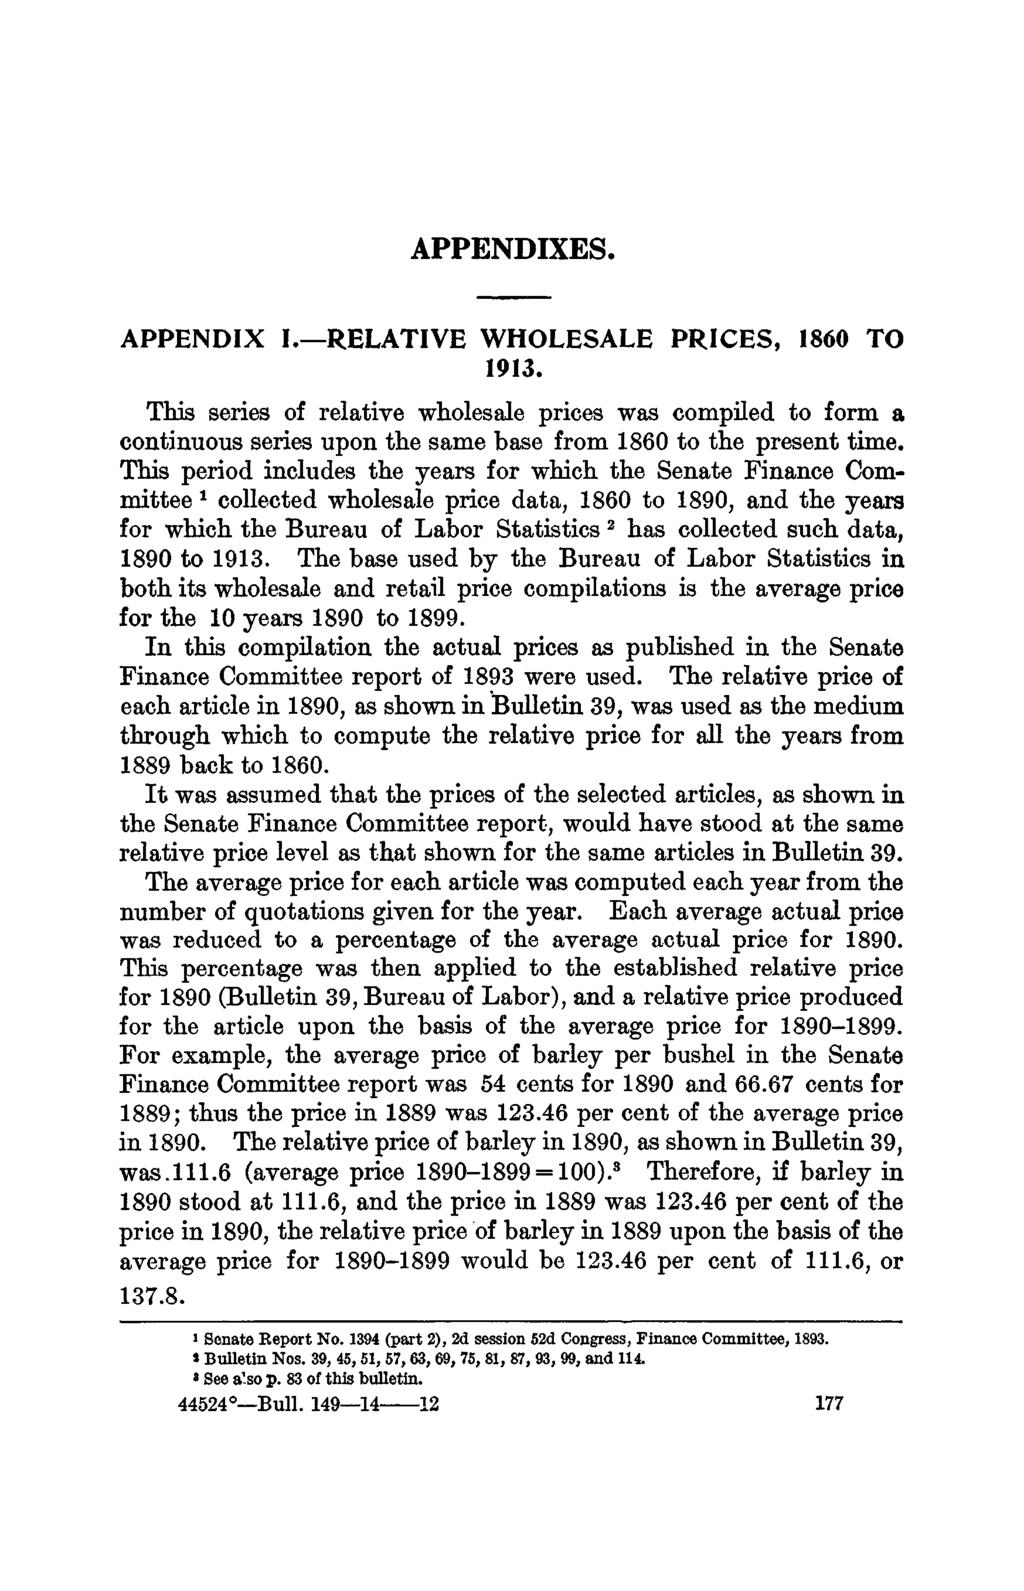 APPENDIXES. APPENDIX I. RELATIVE WHOLESALE PRICES, 1860 TO 1913. This series of relative wholesale s was compiled to form a continuous series upon the same base from 1860 to the present time.